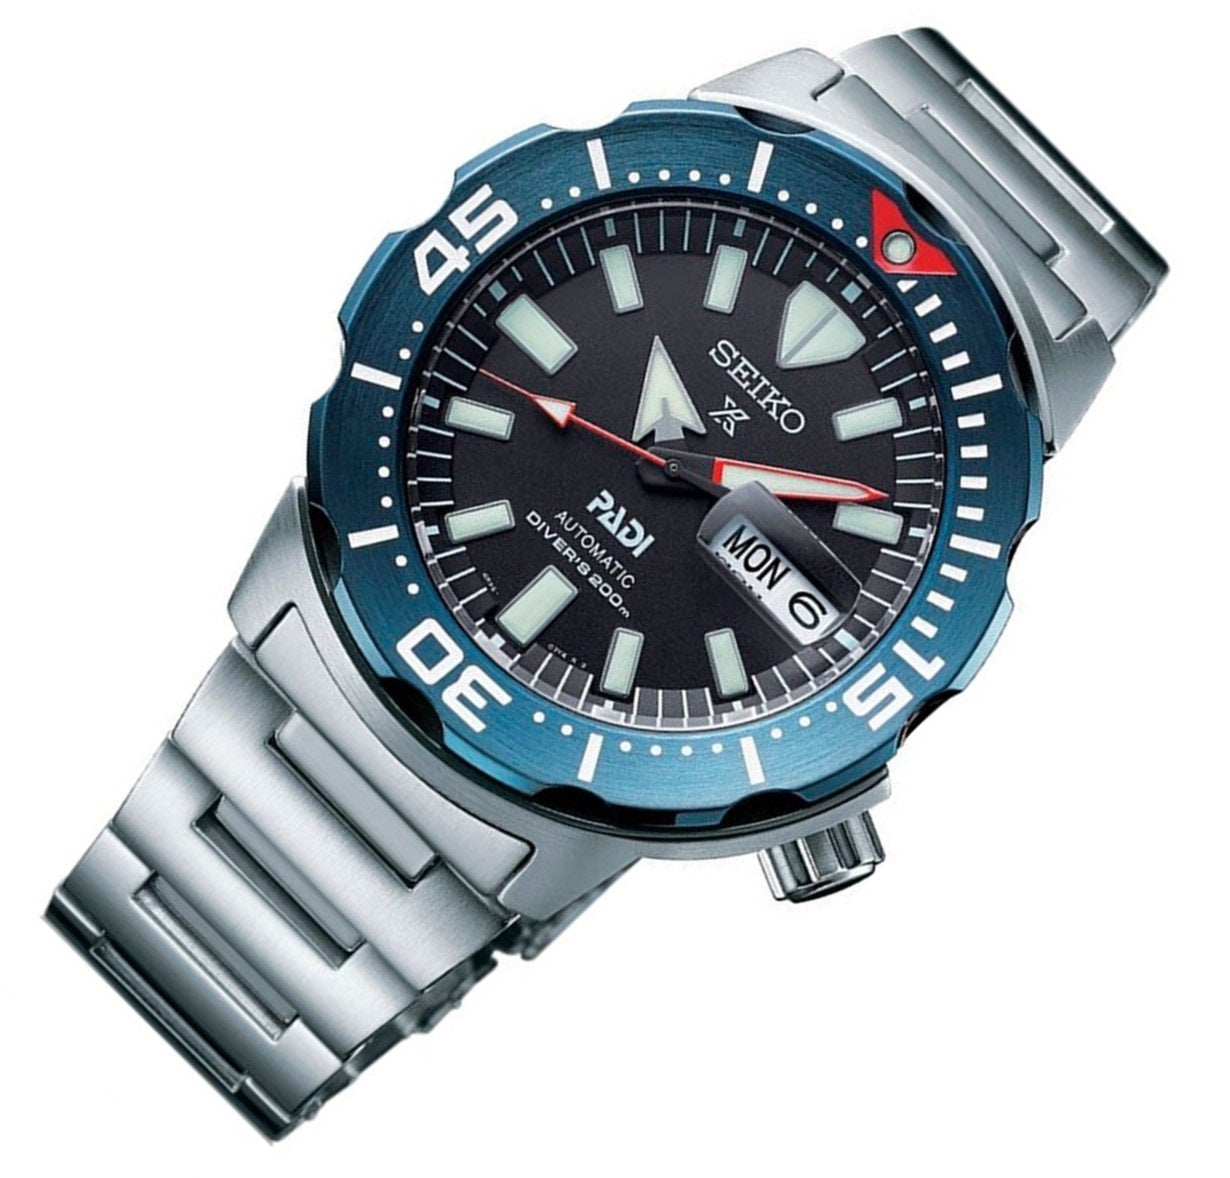 Seiko SRPE27K1 Prospex Monster PADI Special Edition Automatic Watch-Watch Portal Philippines